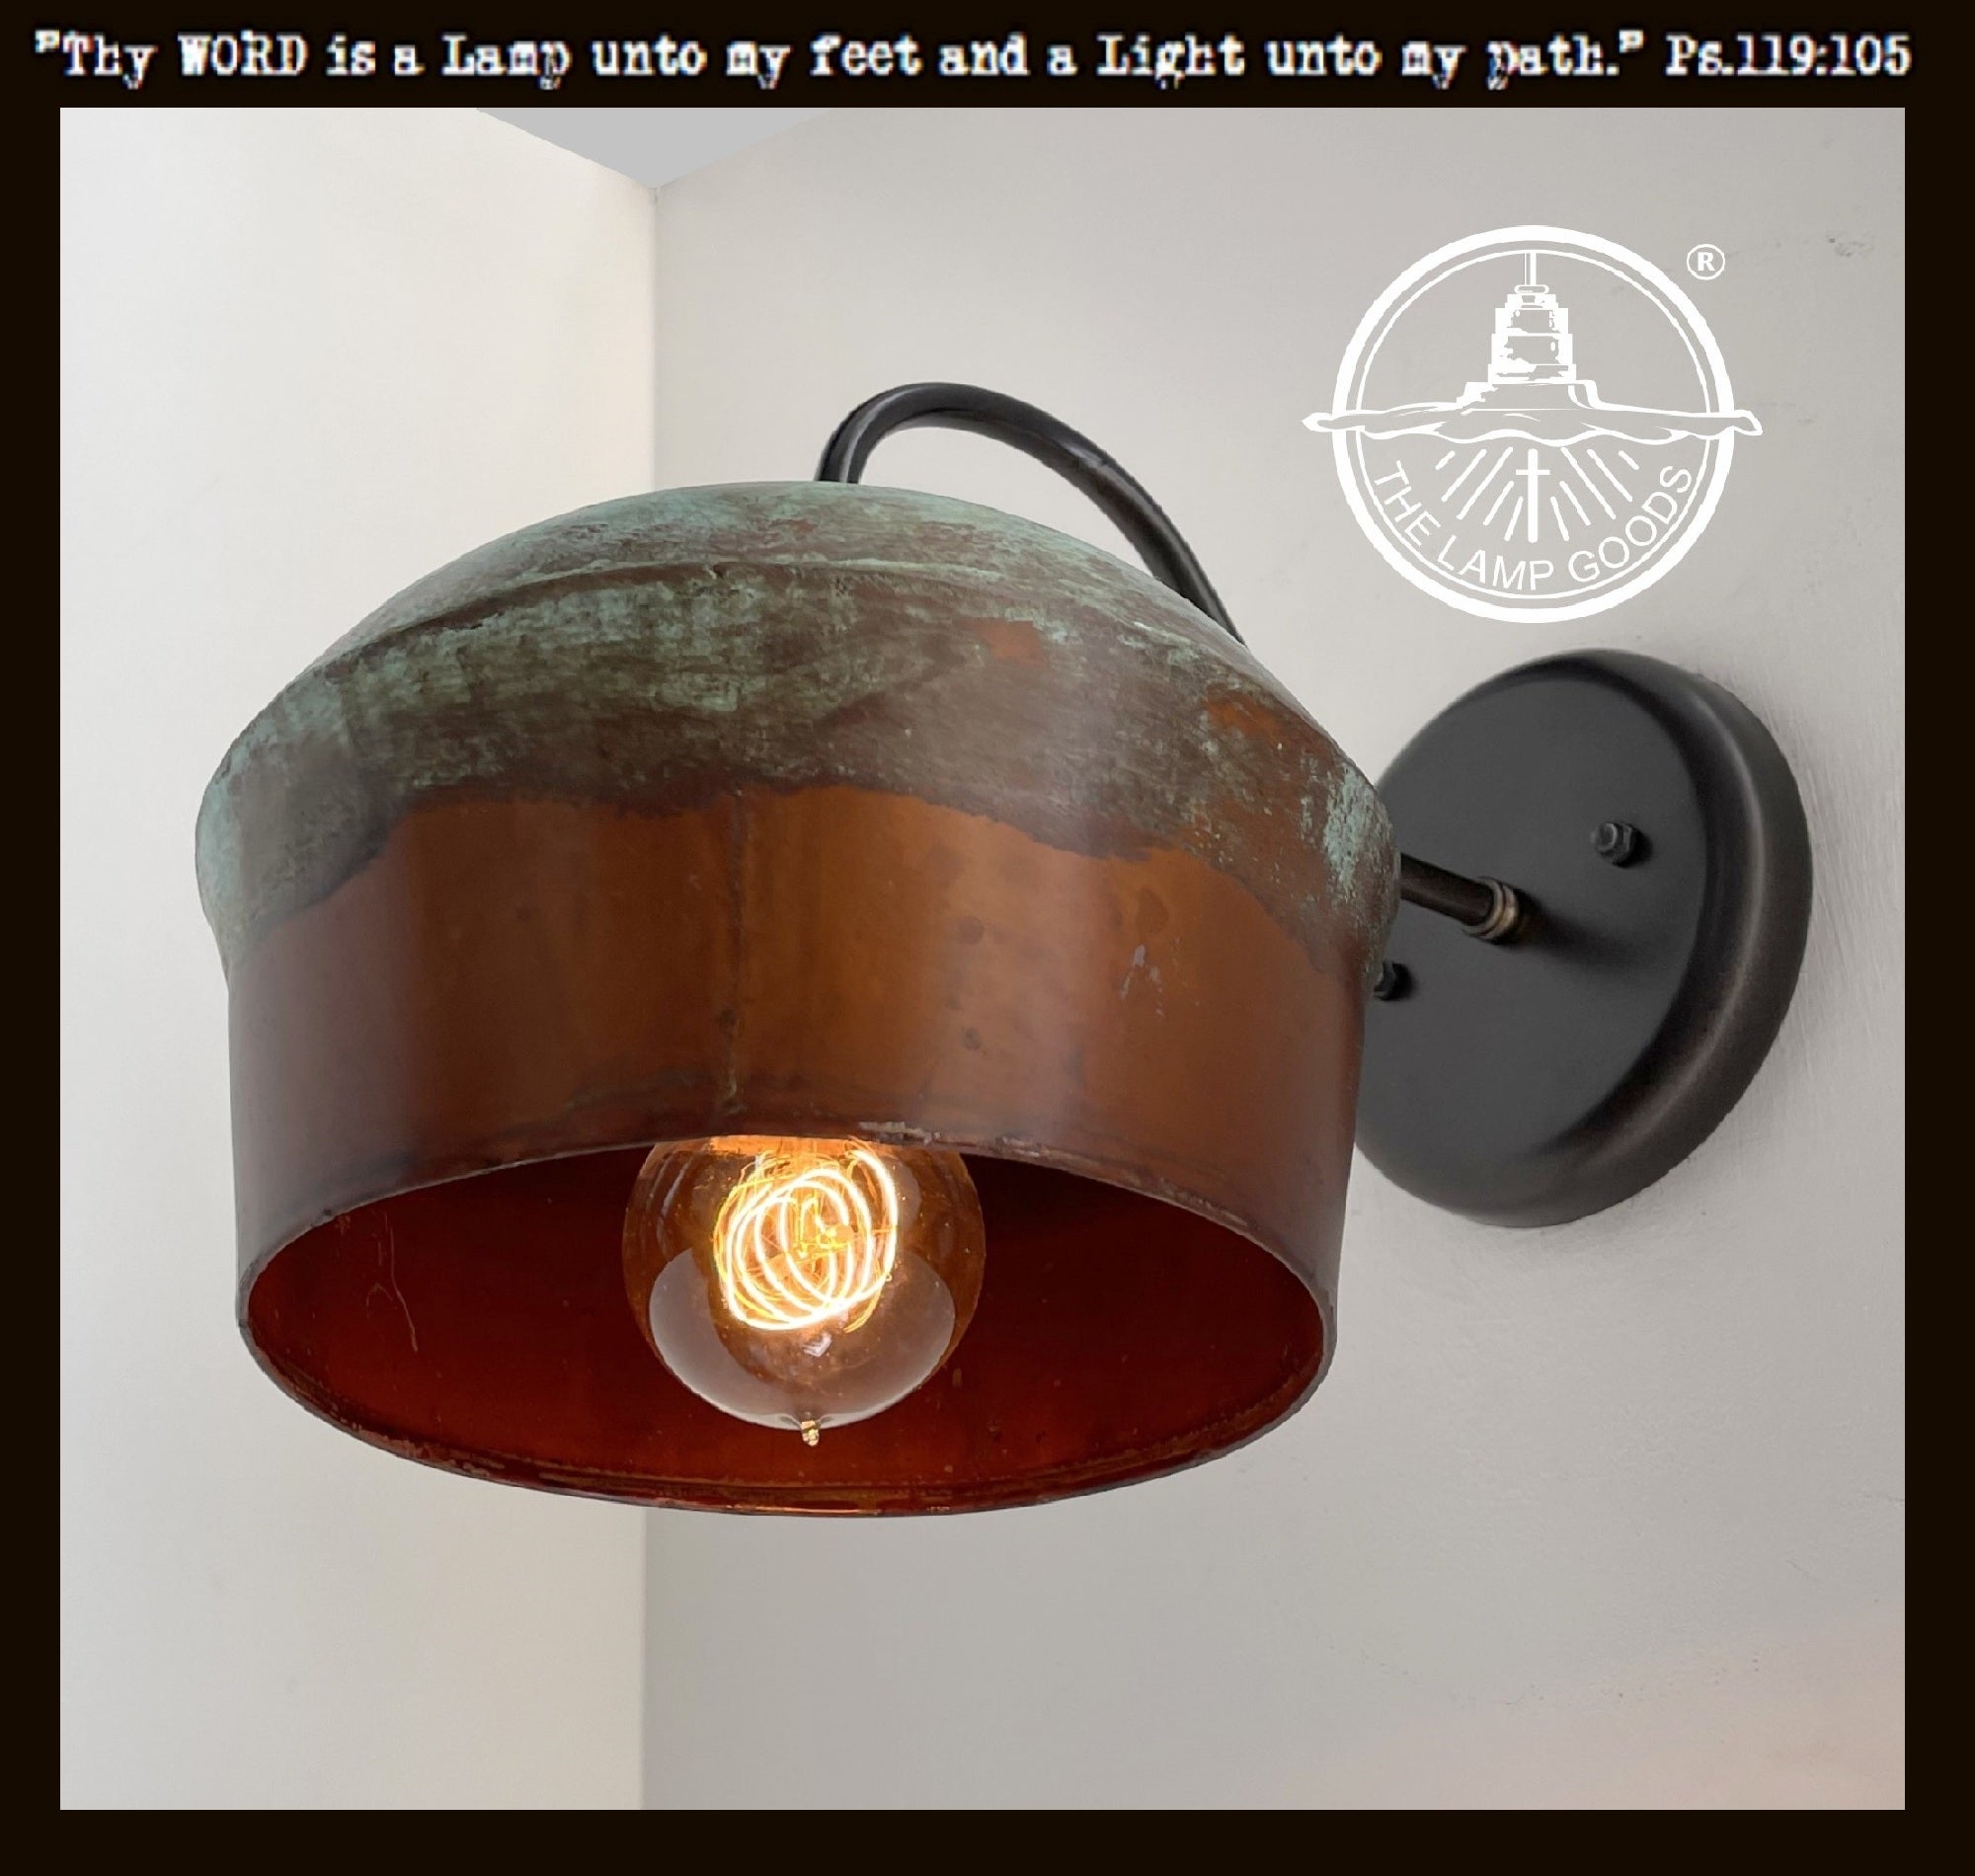 COPPER Handcrafted Rustic Farmhouse Wall Sconce Light